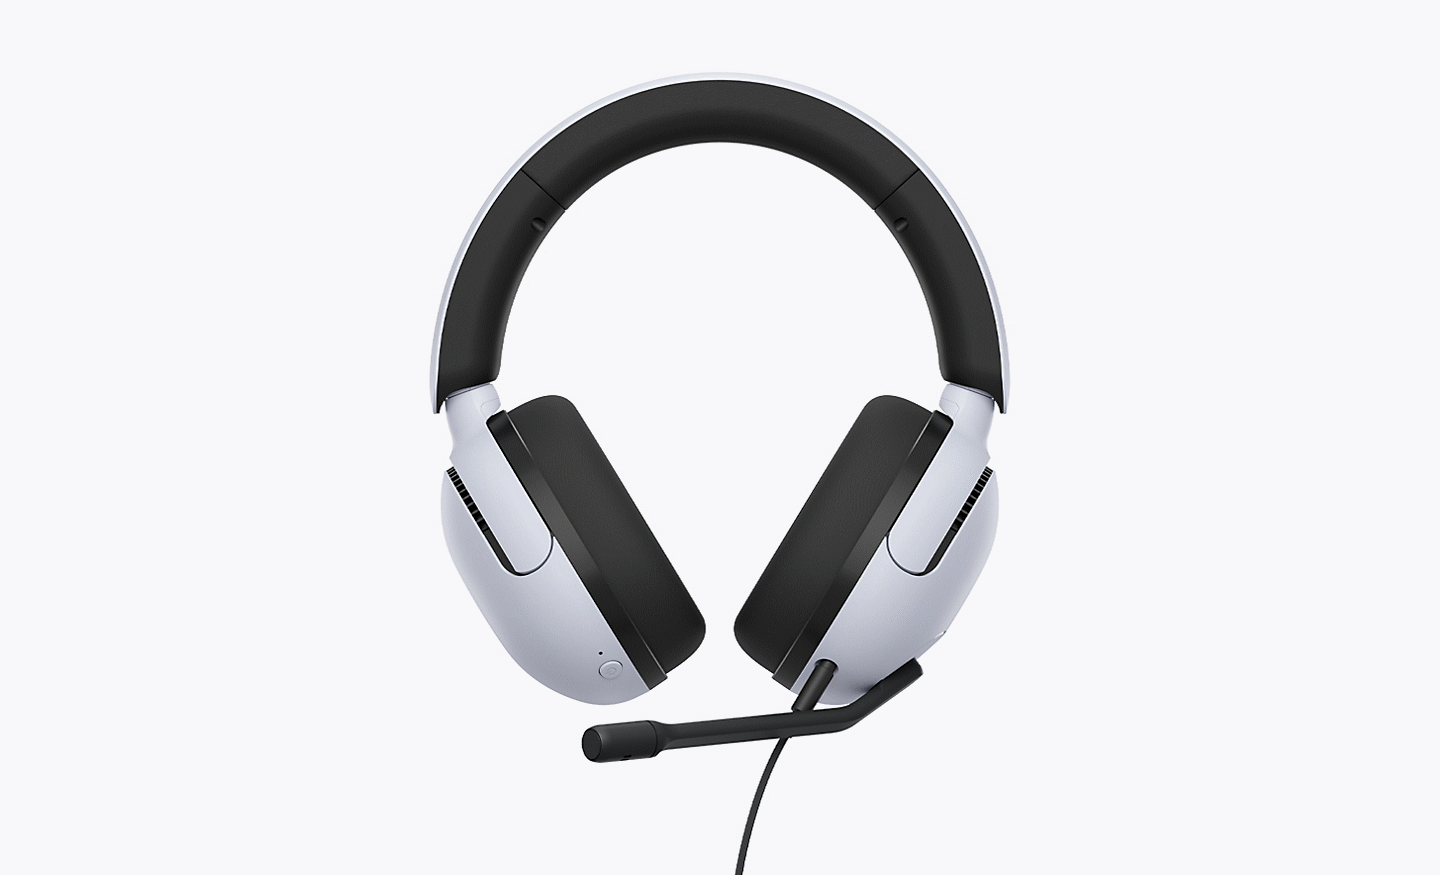 Front profile of the INZONE H5 headphones with the audio cable plugged in